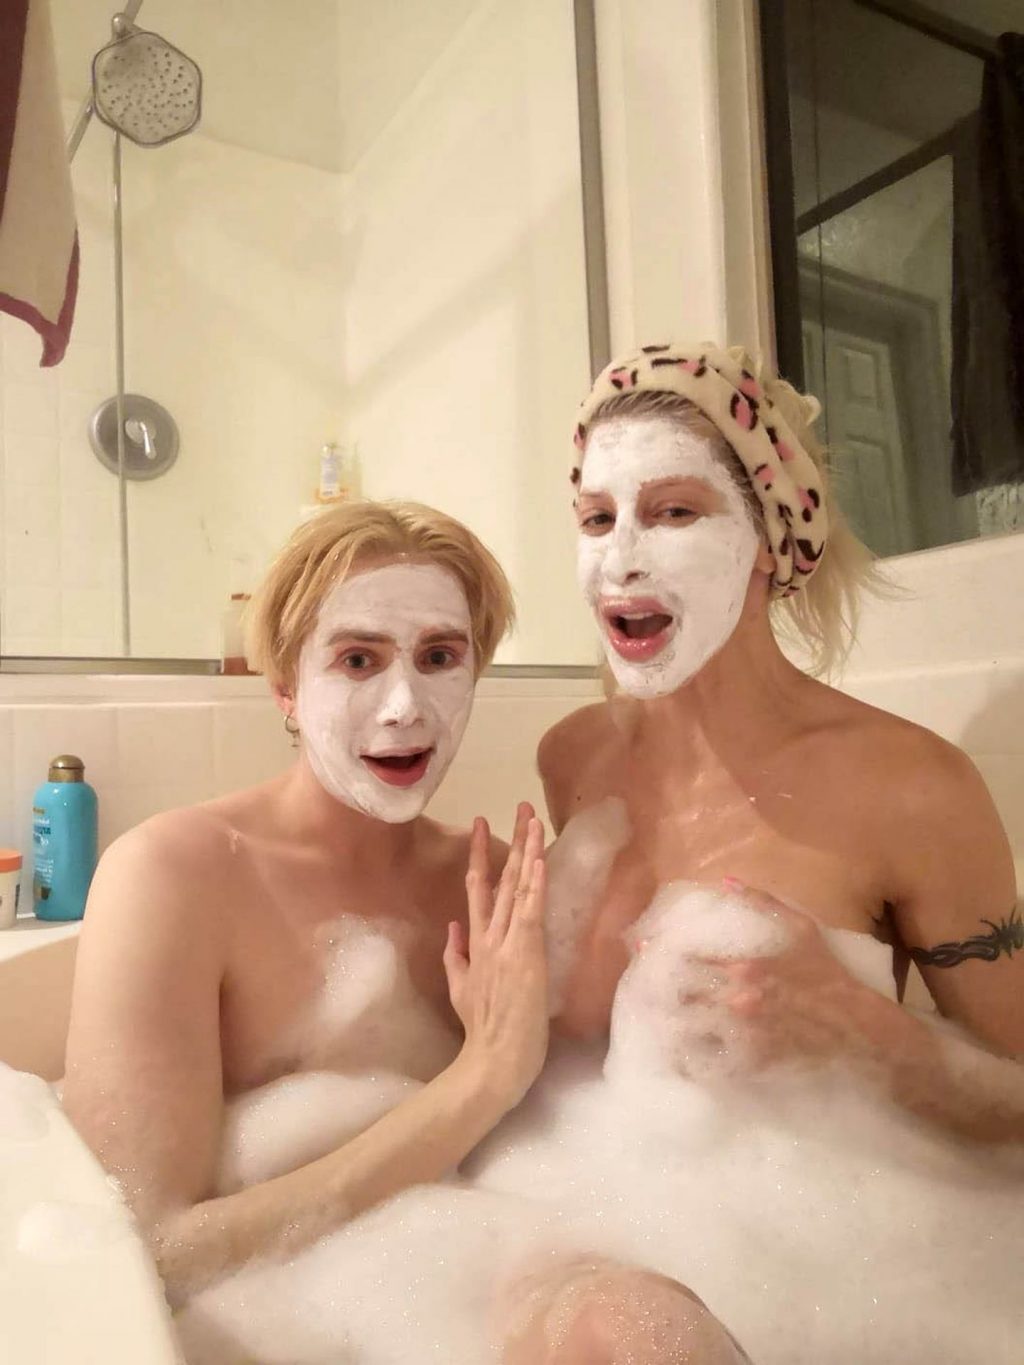 Frenchy Morgan &amp; Oli London Have a Personal Spa Day (6 Photos)